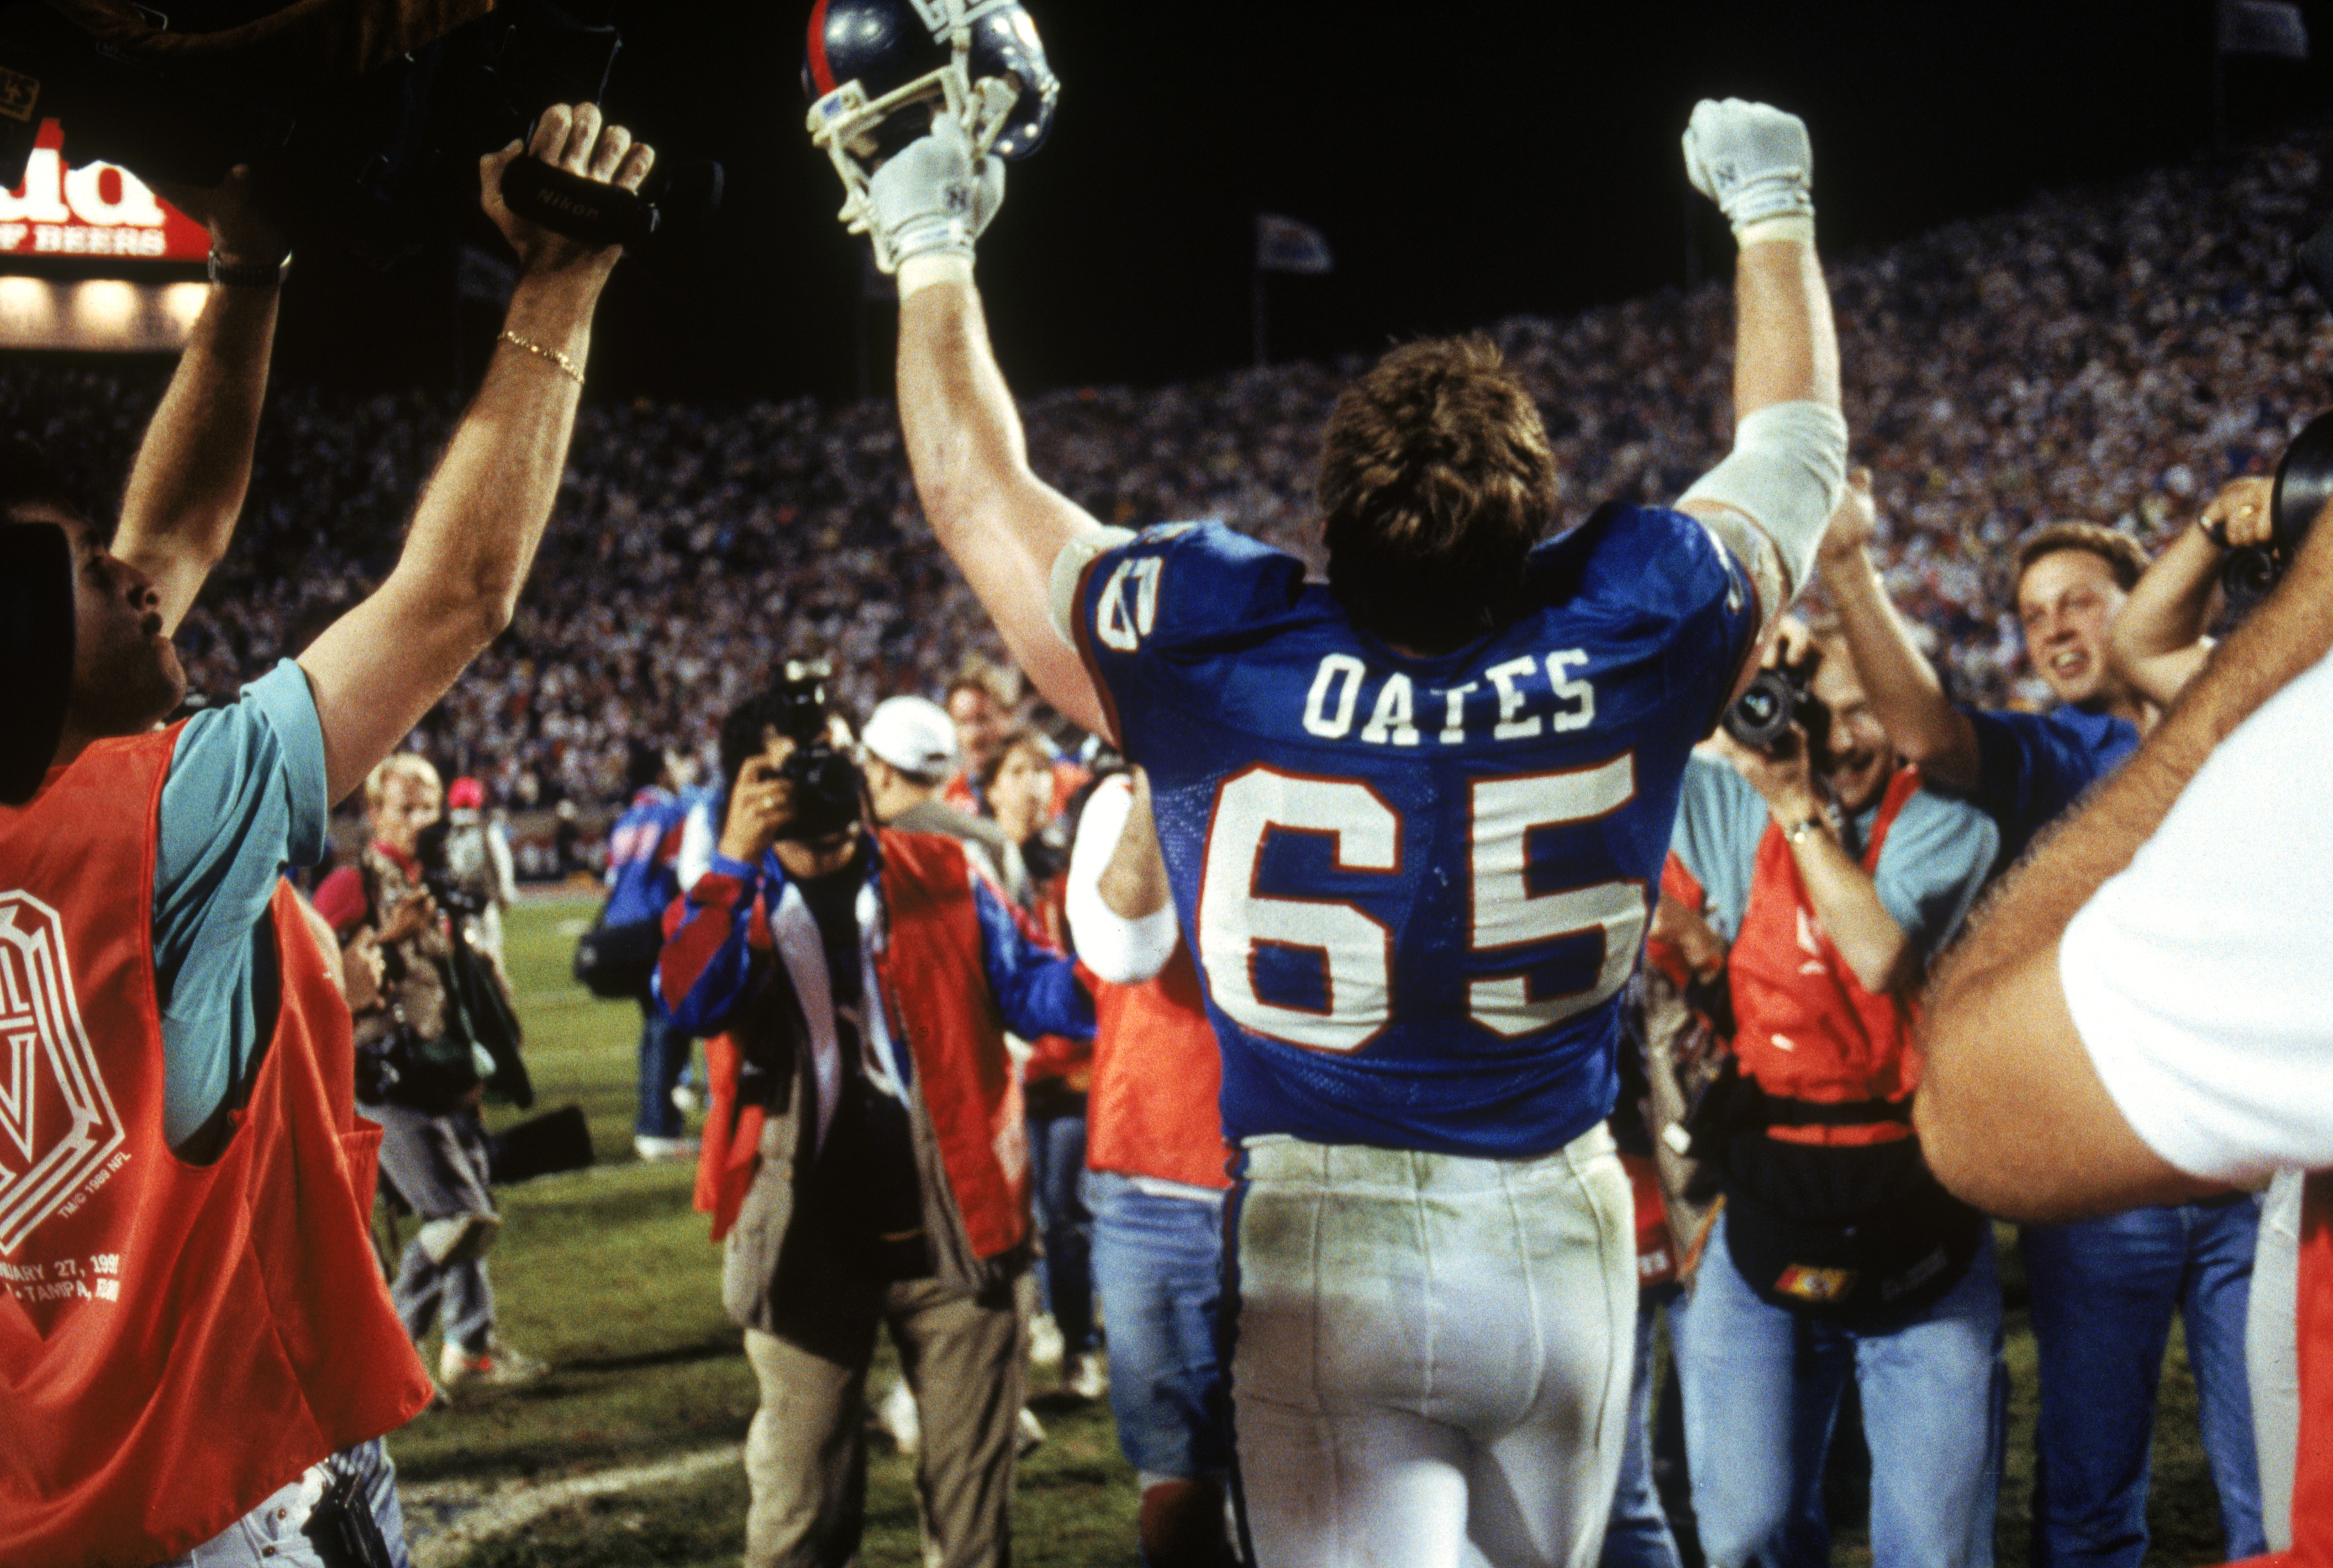 TAMPA, FL - JANUARY 27:  Center Bart Oates #65 of the New York Giants celebrates following the game against the Buffalo Bills during Super Bowl XXV at Tampa Stadium on January 27, 1991 in Tampa, Florida. The Giants defeated the Bills 20-19.  (Photo by Geo